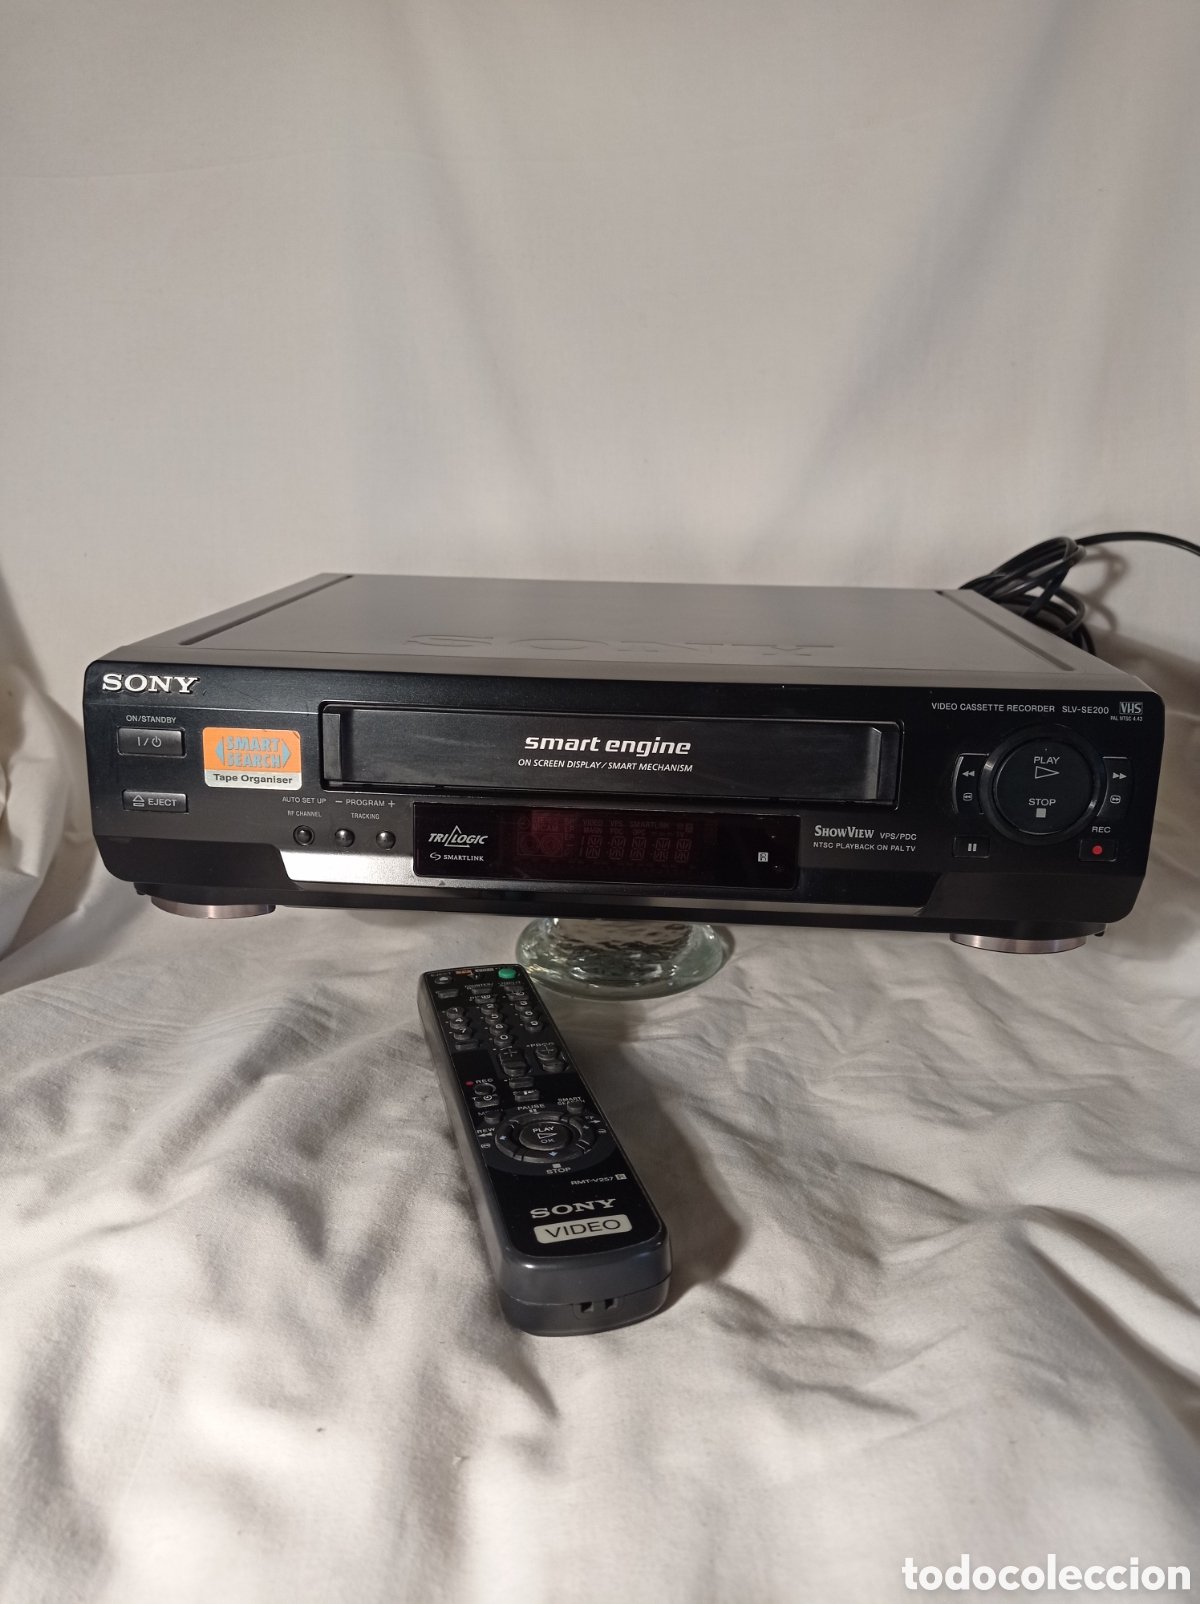 FIRSTLINE REPRODUCTOR VHS